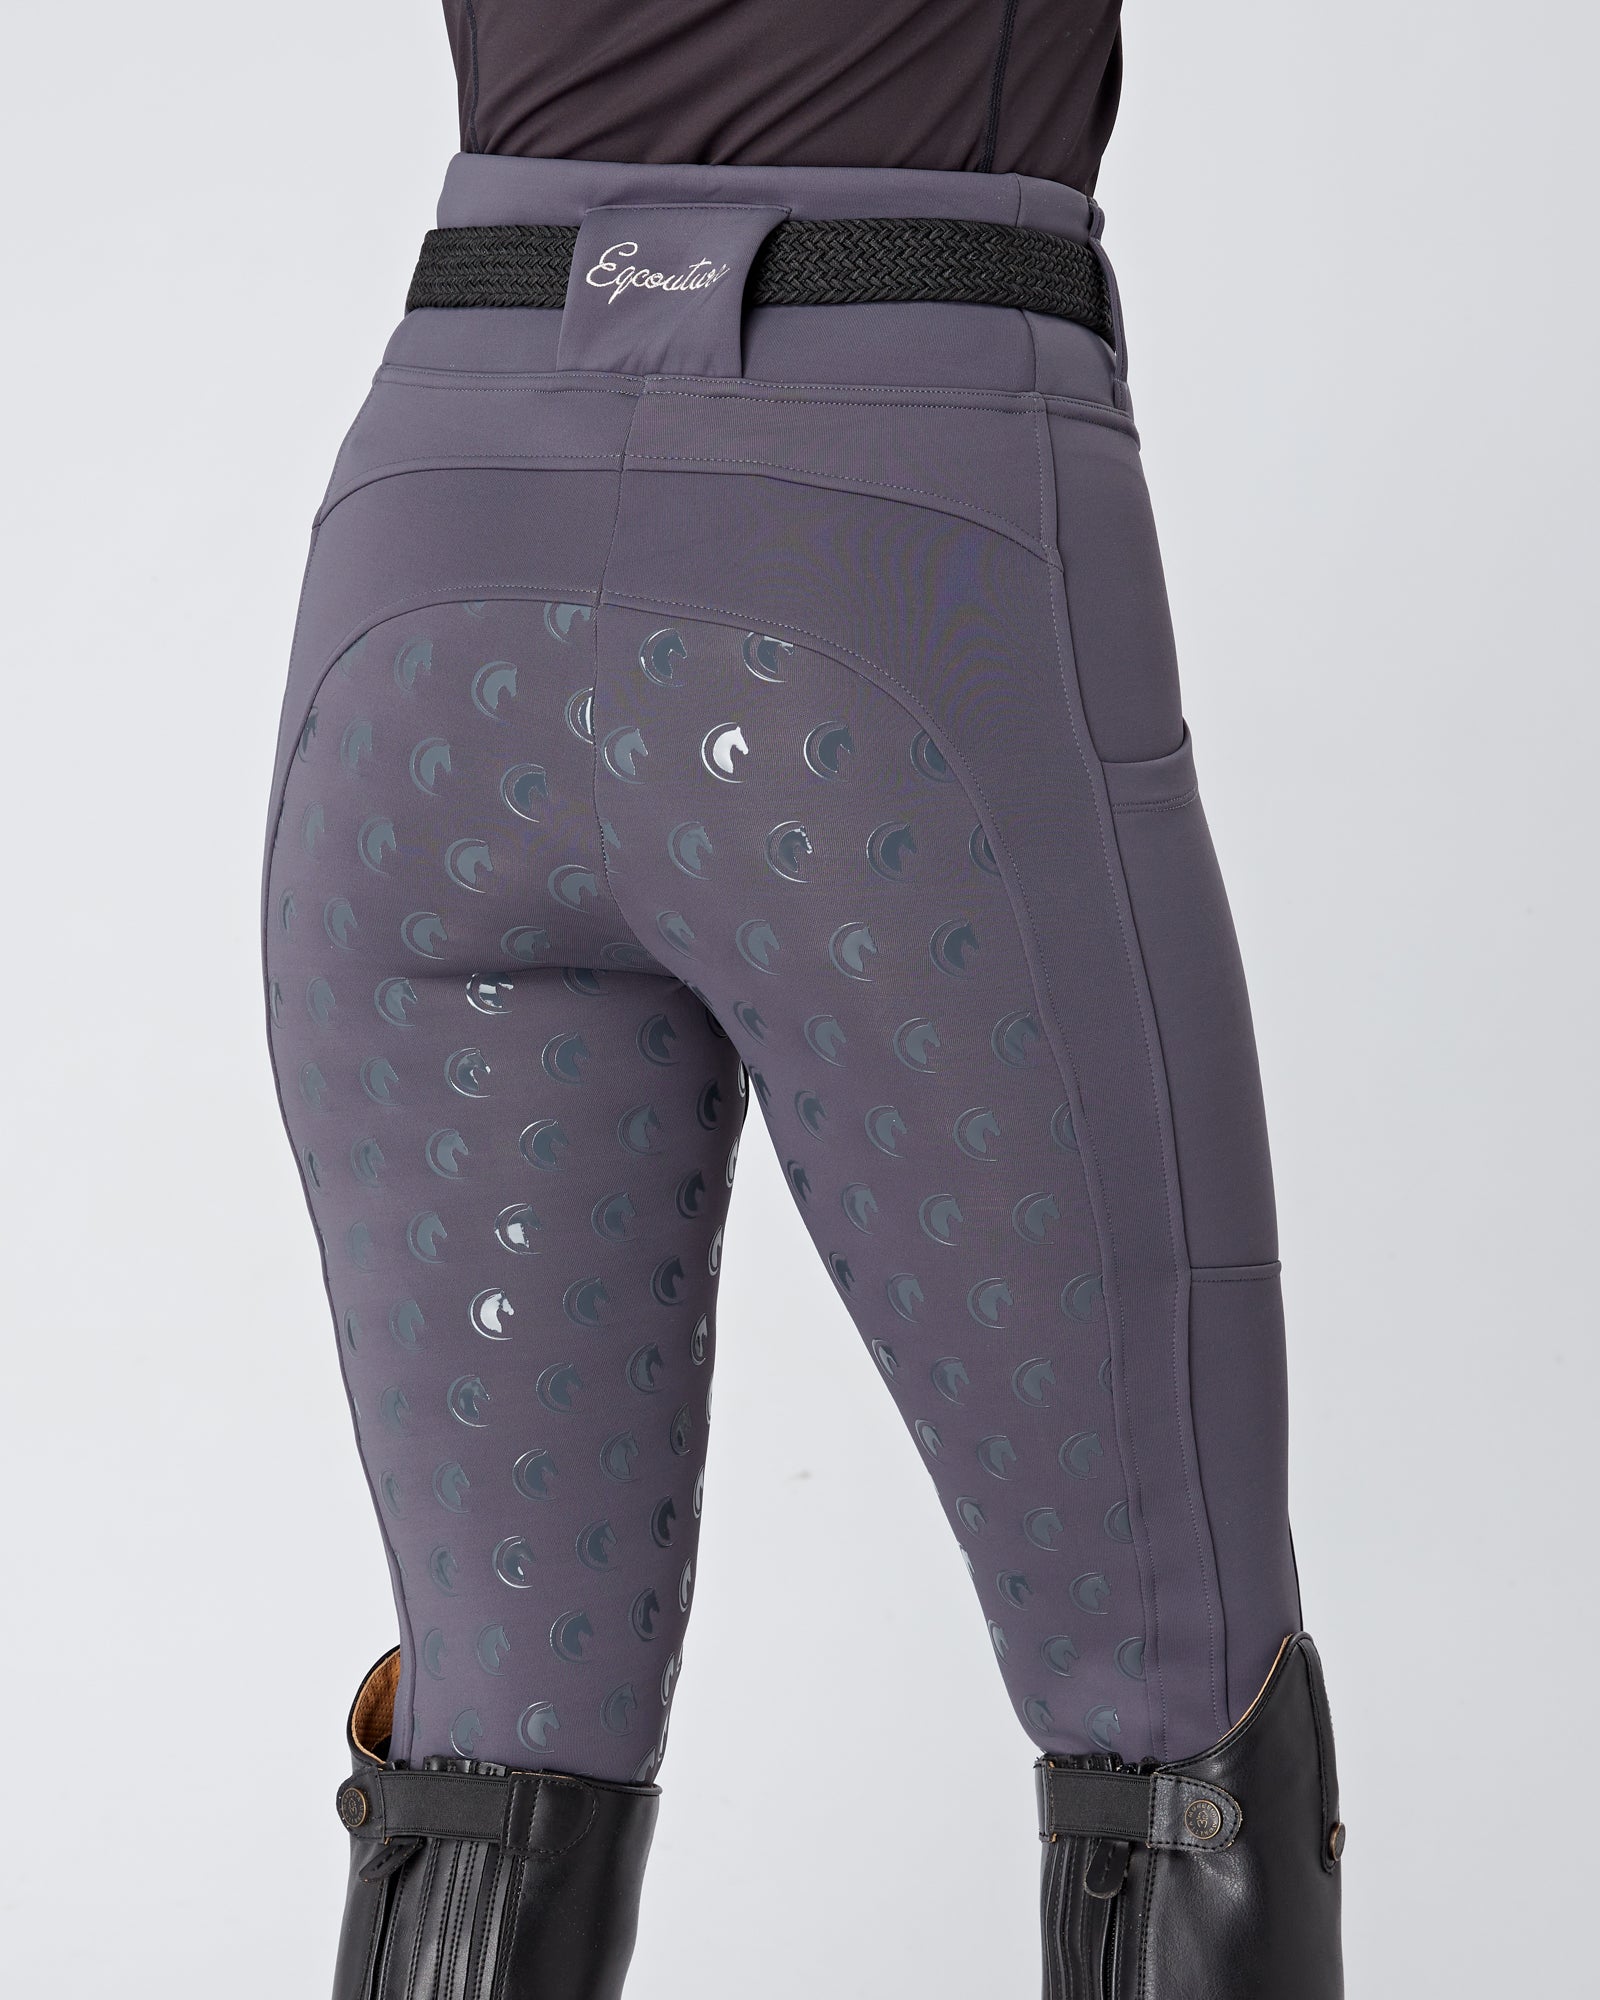 Horse Riding Leggings/Tights with phone pockets - Eqcouture